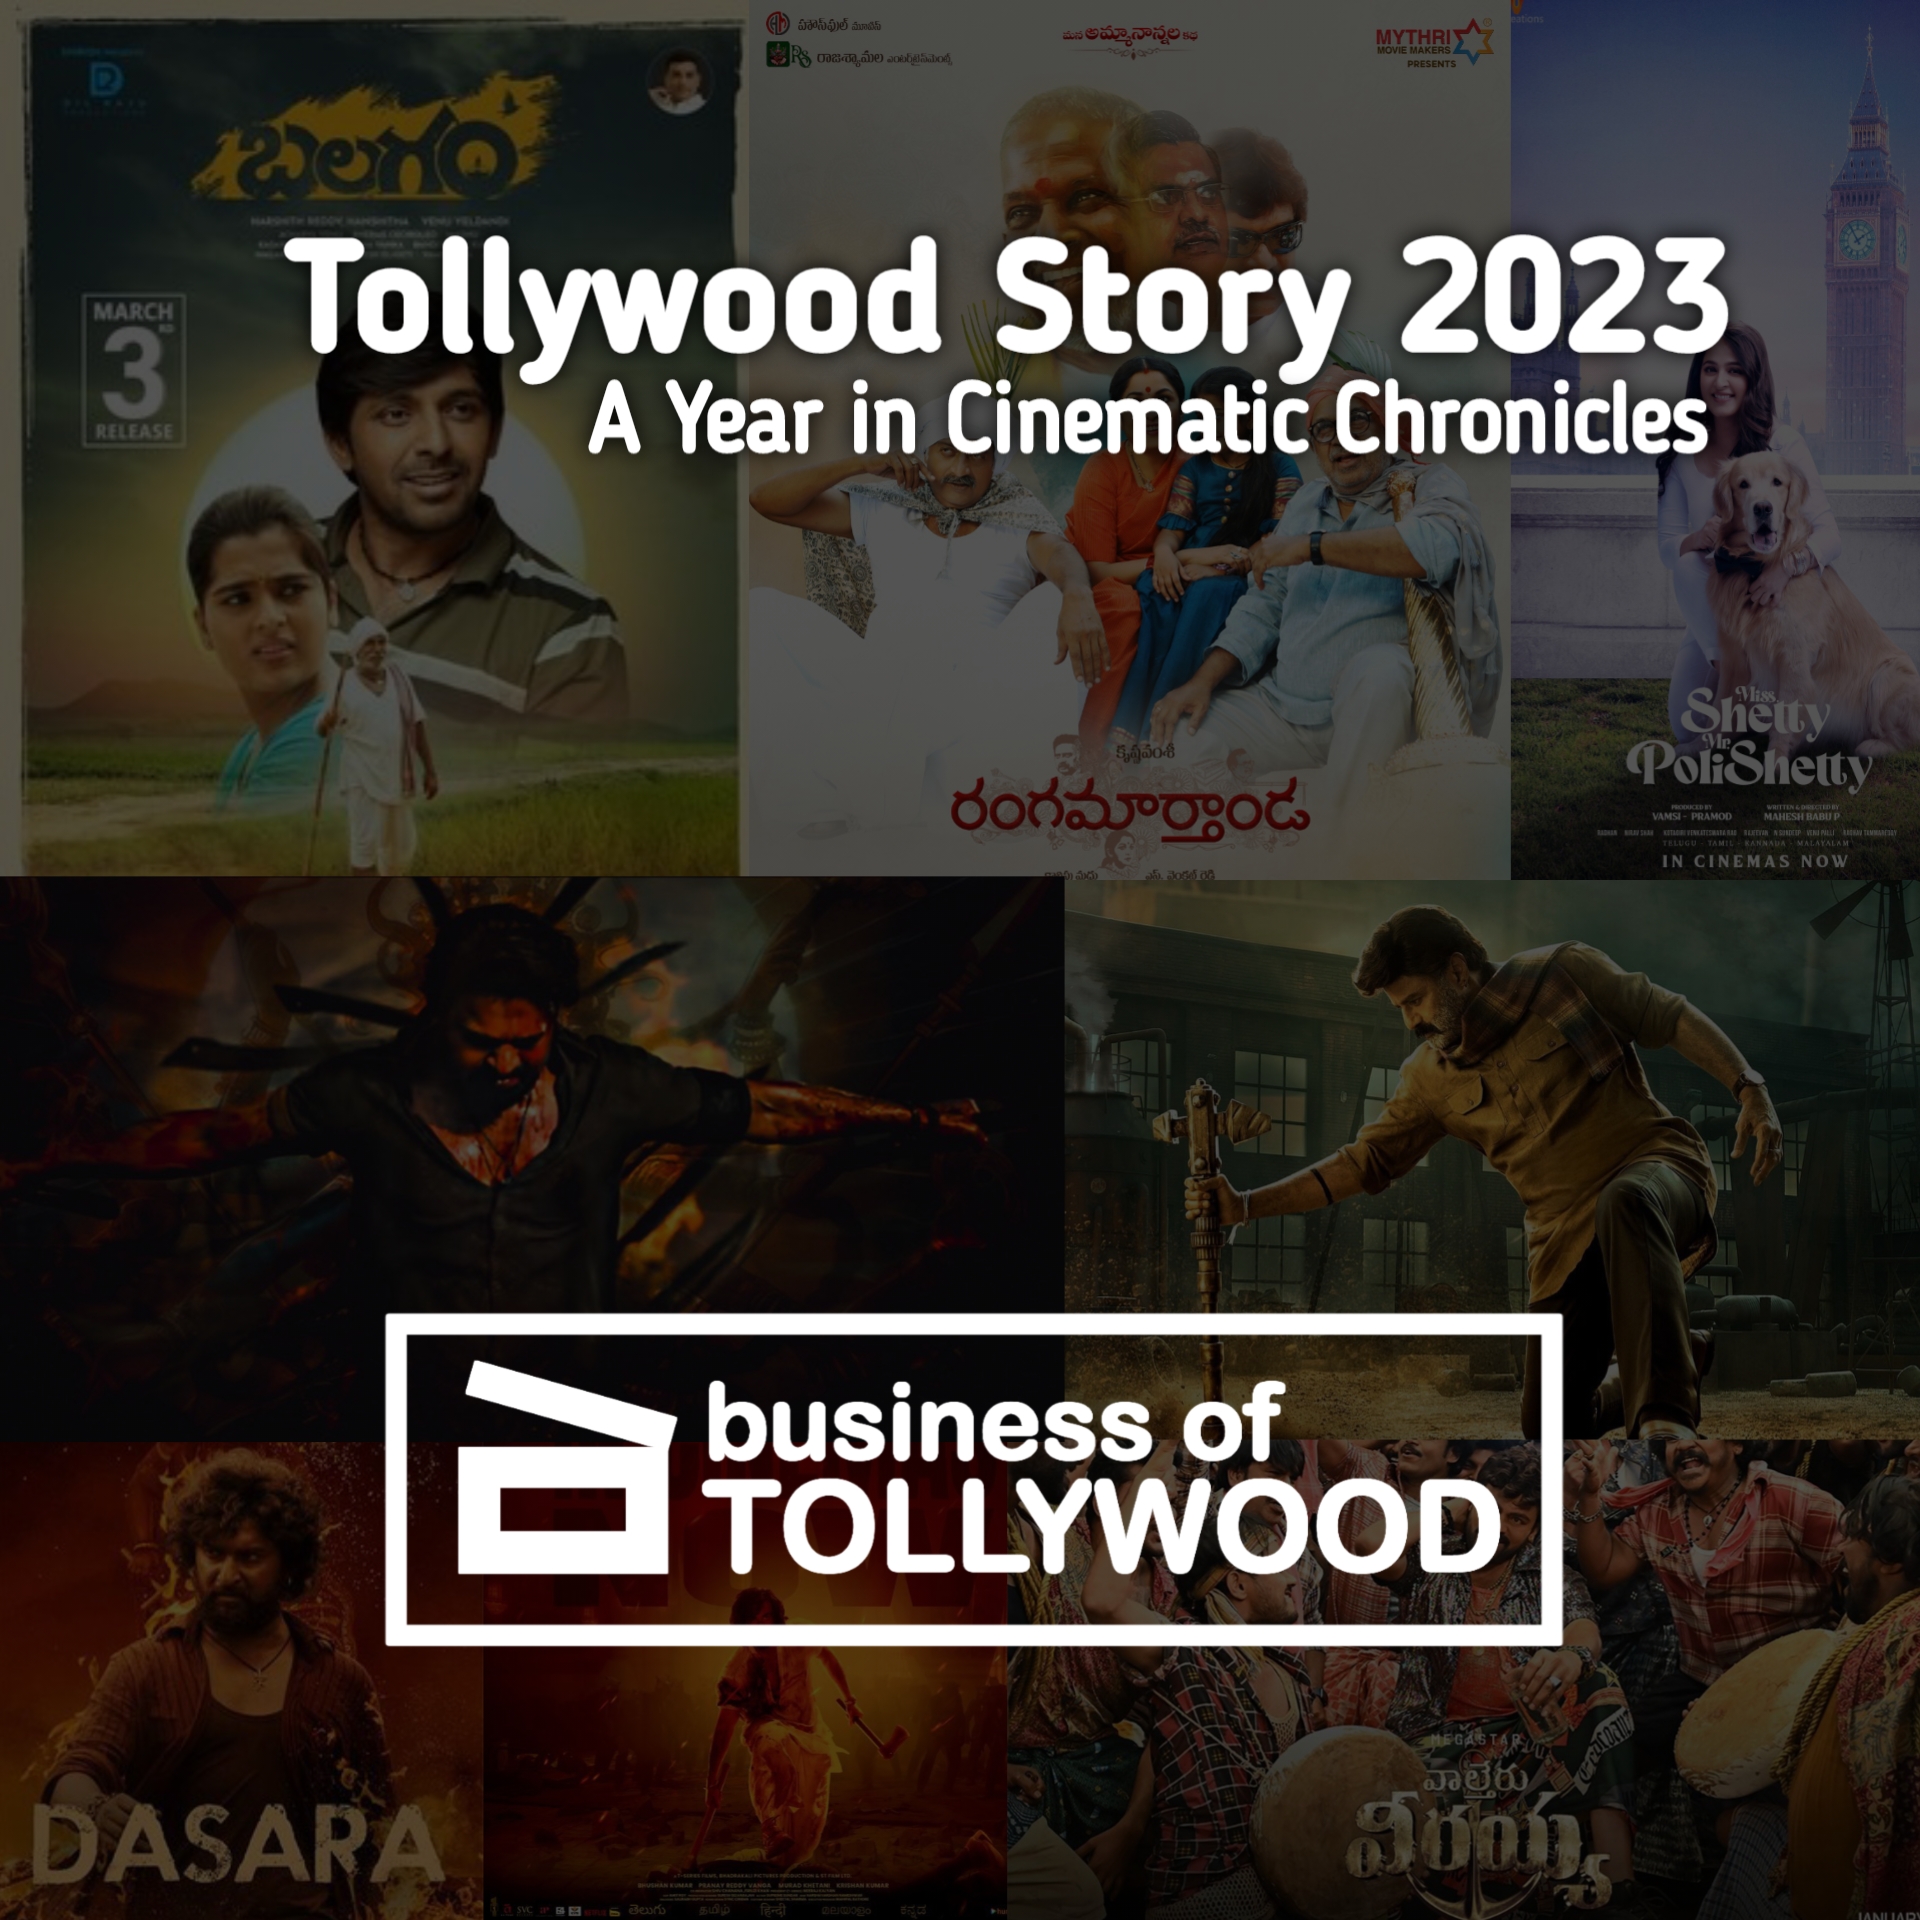 Tollywood Story 2023: A Year in Cinematic Chronicles